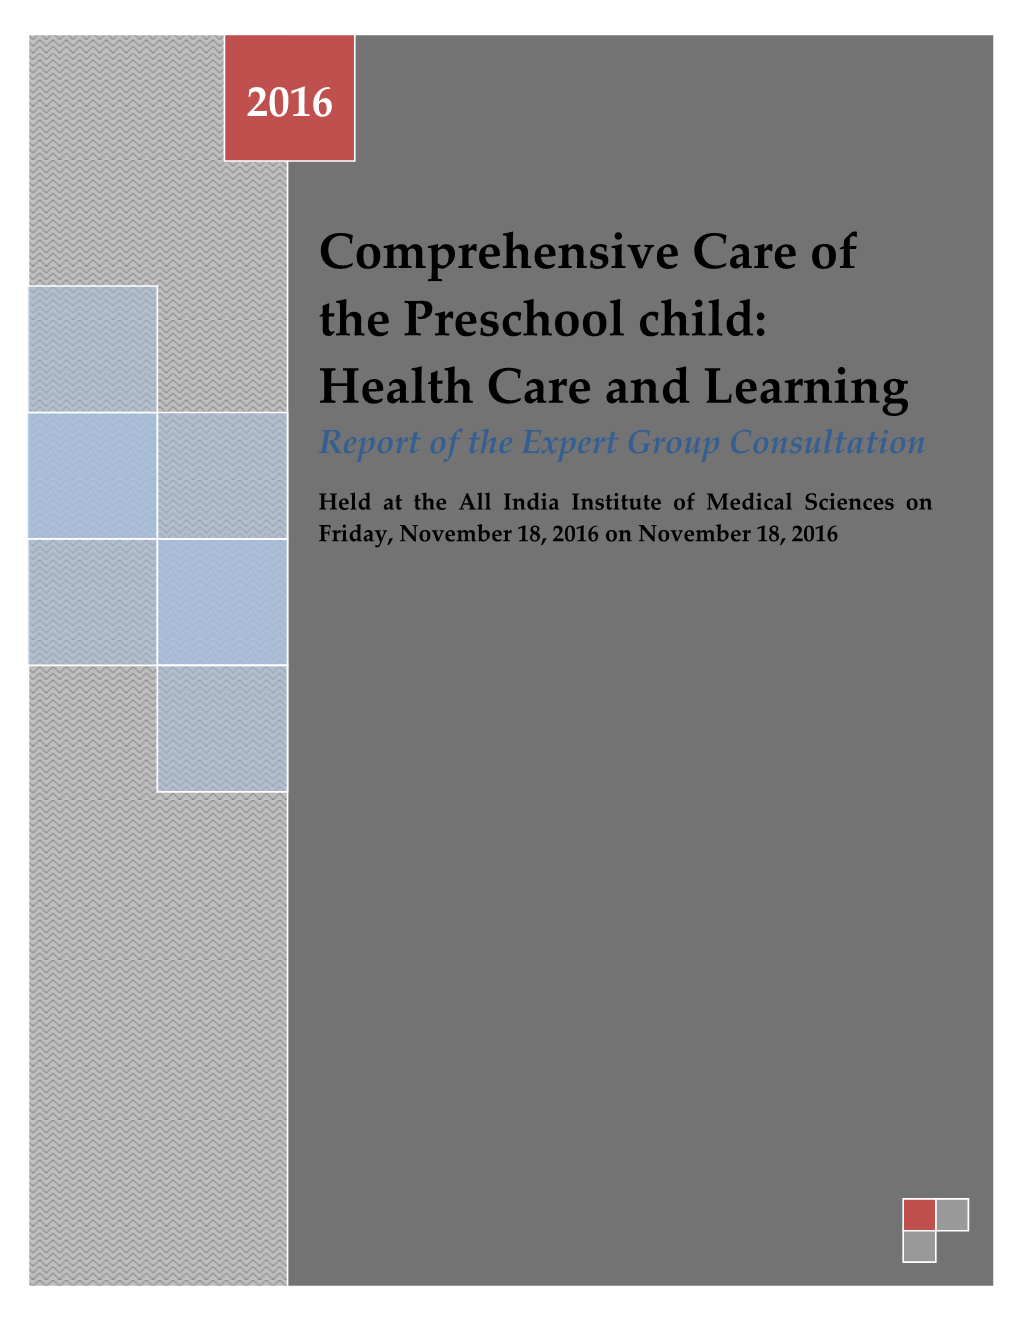 Comprehensive Care of the Preschool Child: Health Care and Learning Report of the Expert Group Consultation